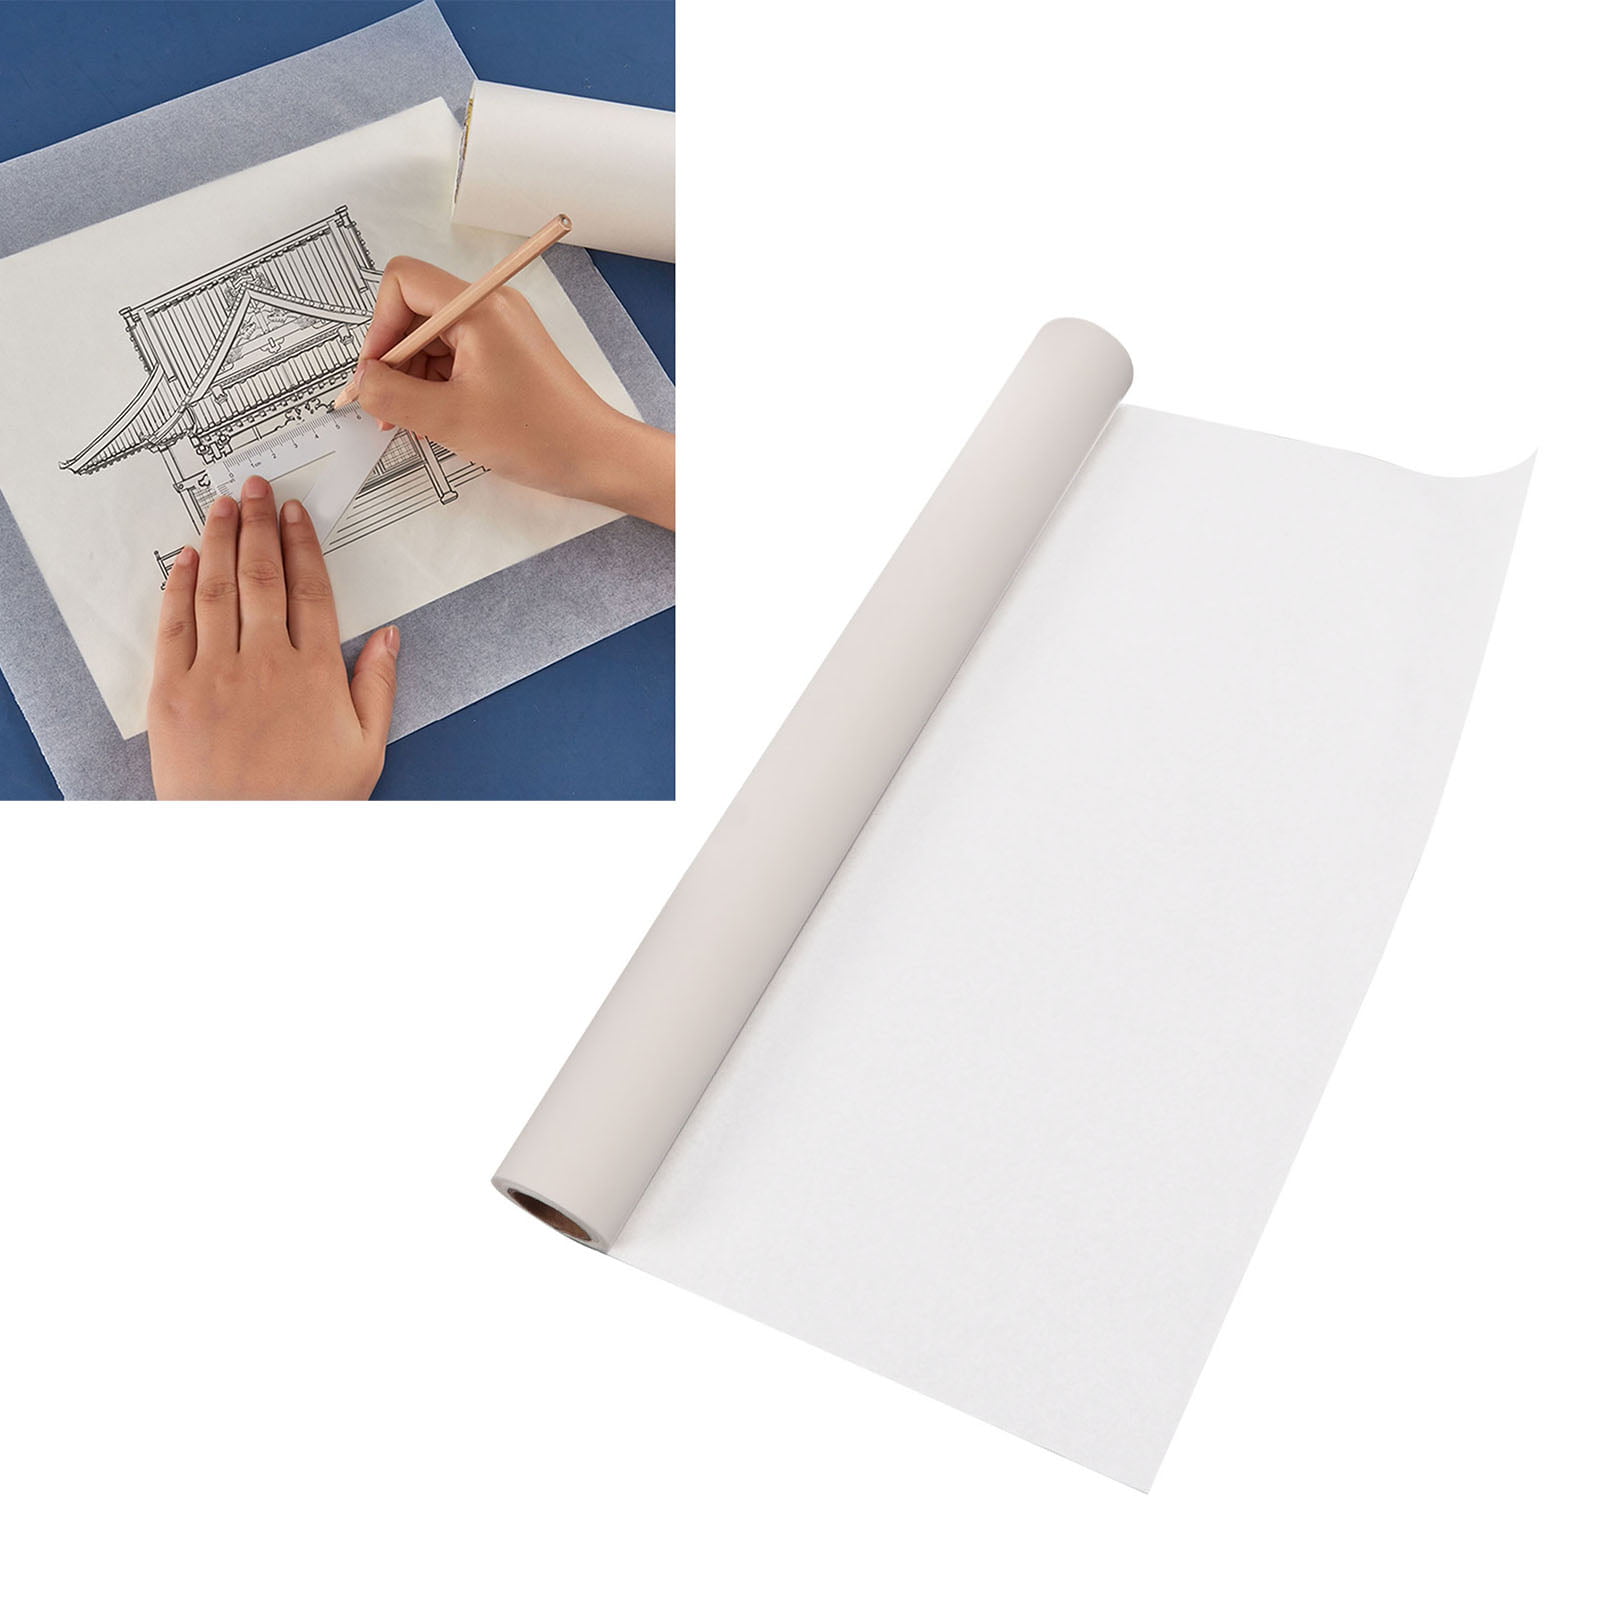 73gsm 83gsm Translucent CAD Tracing Paper For Drawing 18 Inch 24 Inch X 50  Yard